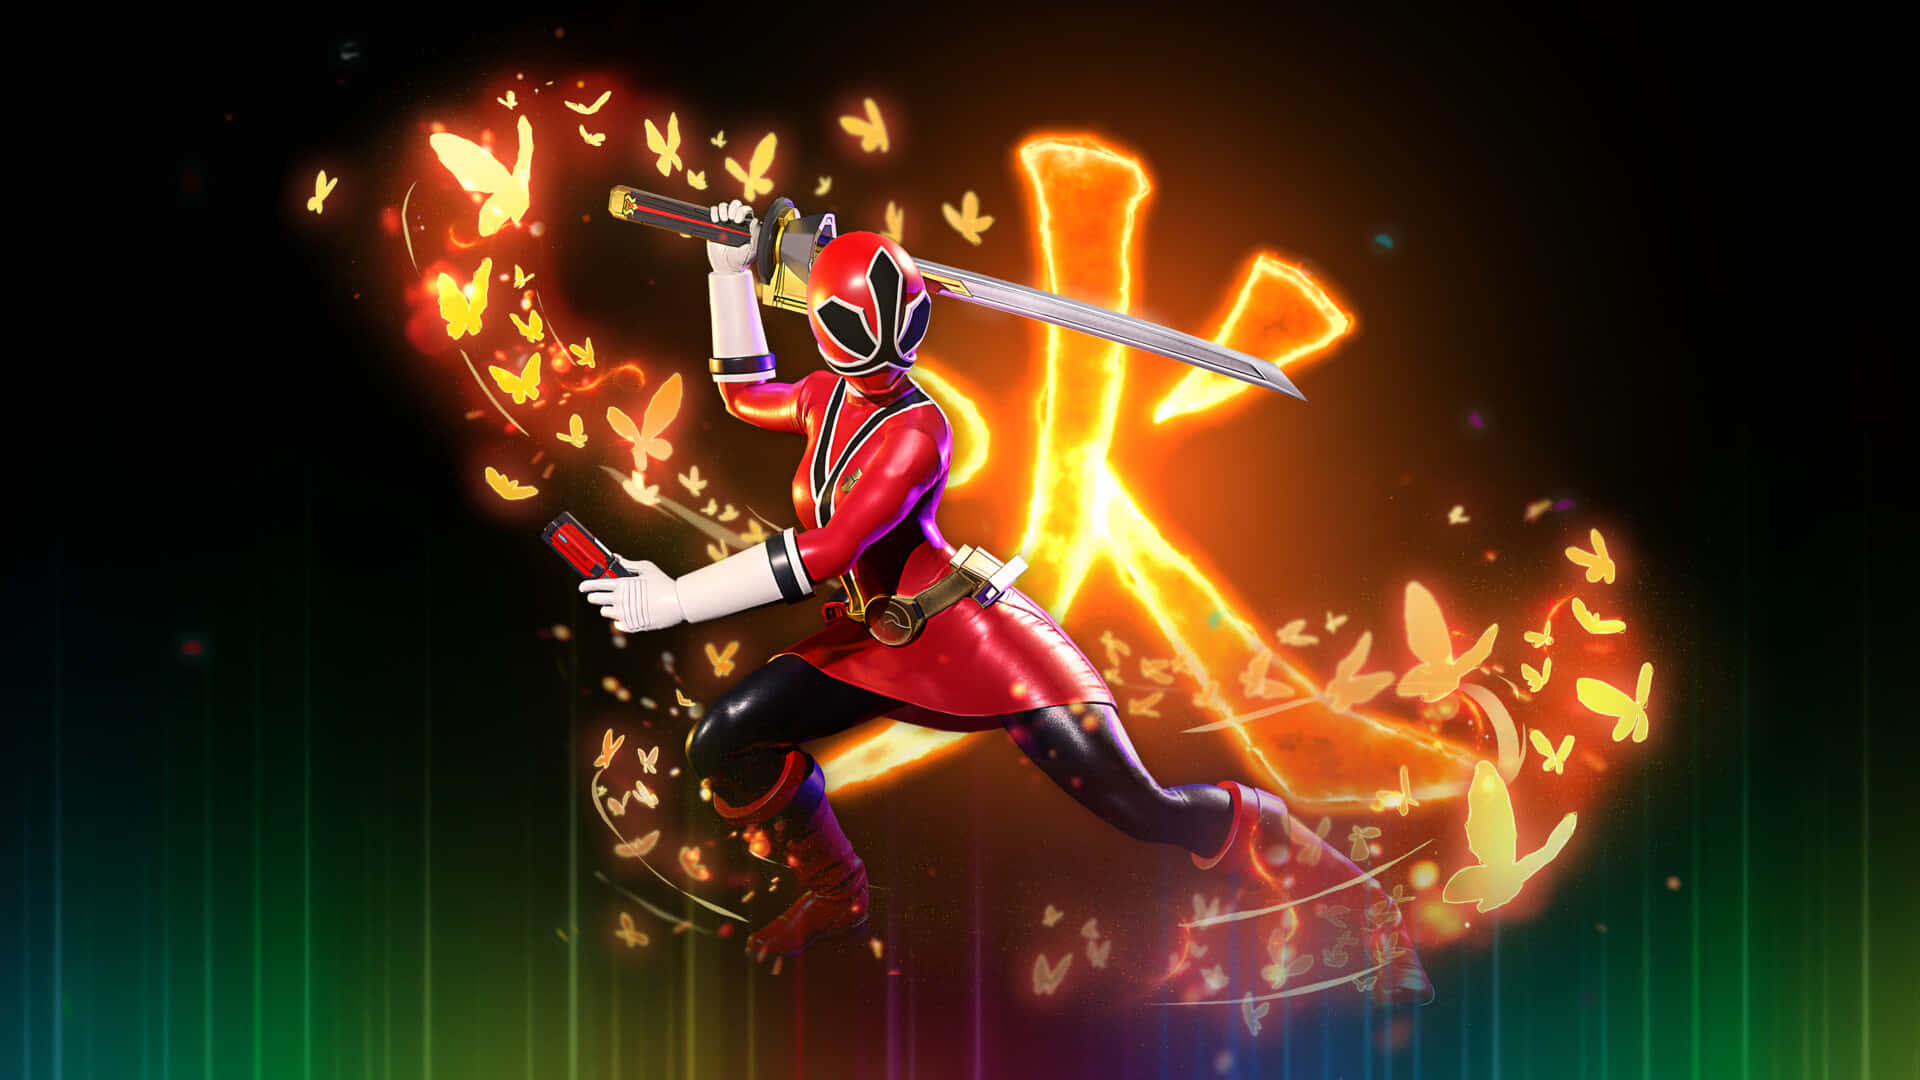 Red Ranger Dynamic Posewith Sword Wallpaper